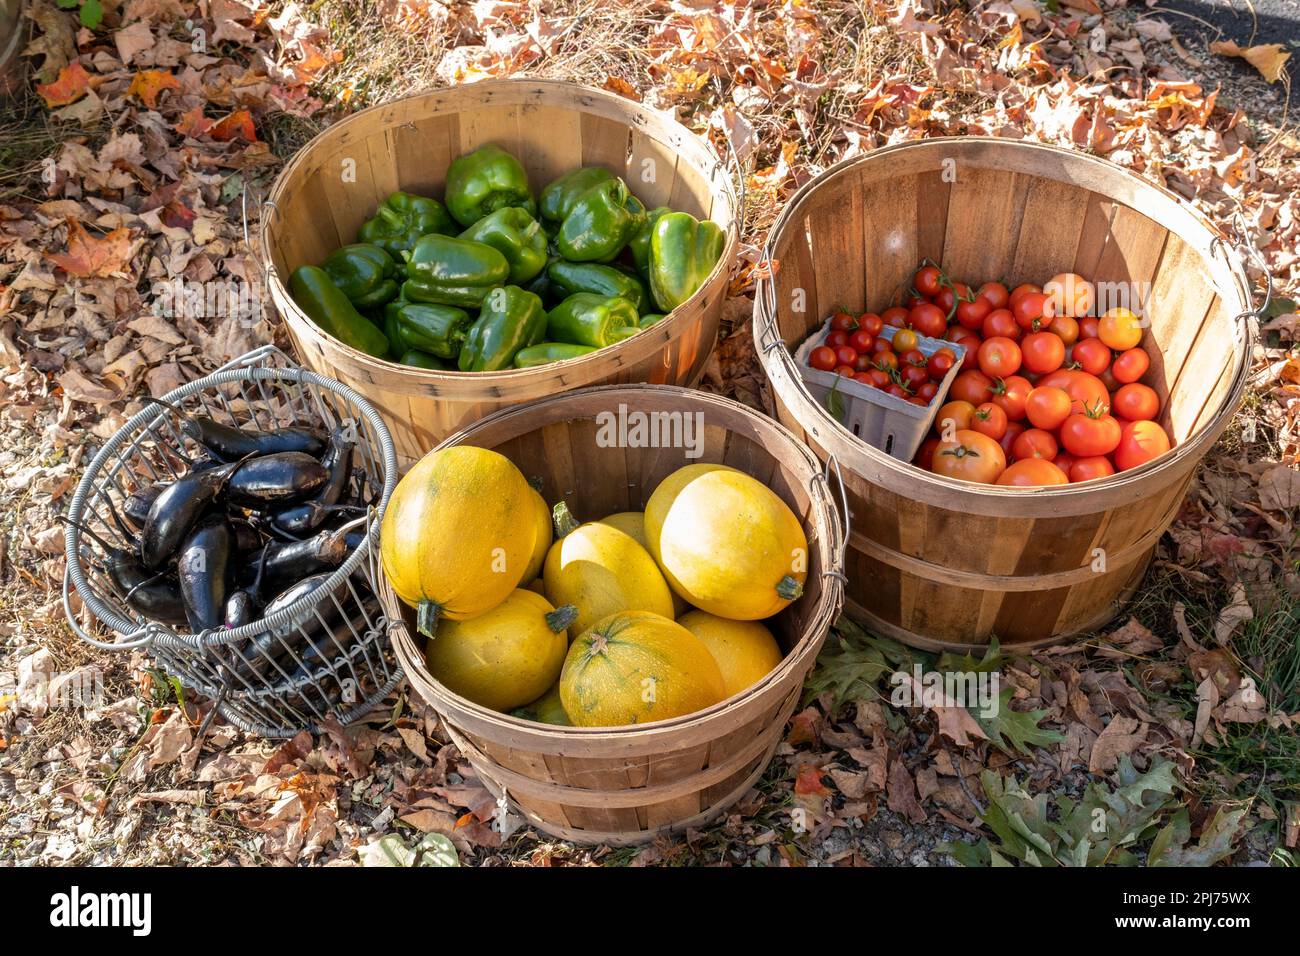 Baskets of just picked vegetables Stock Photo